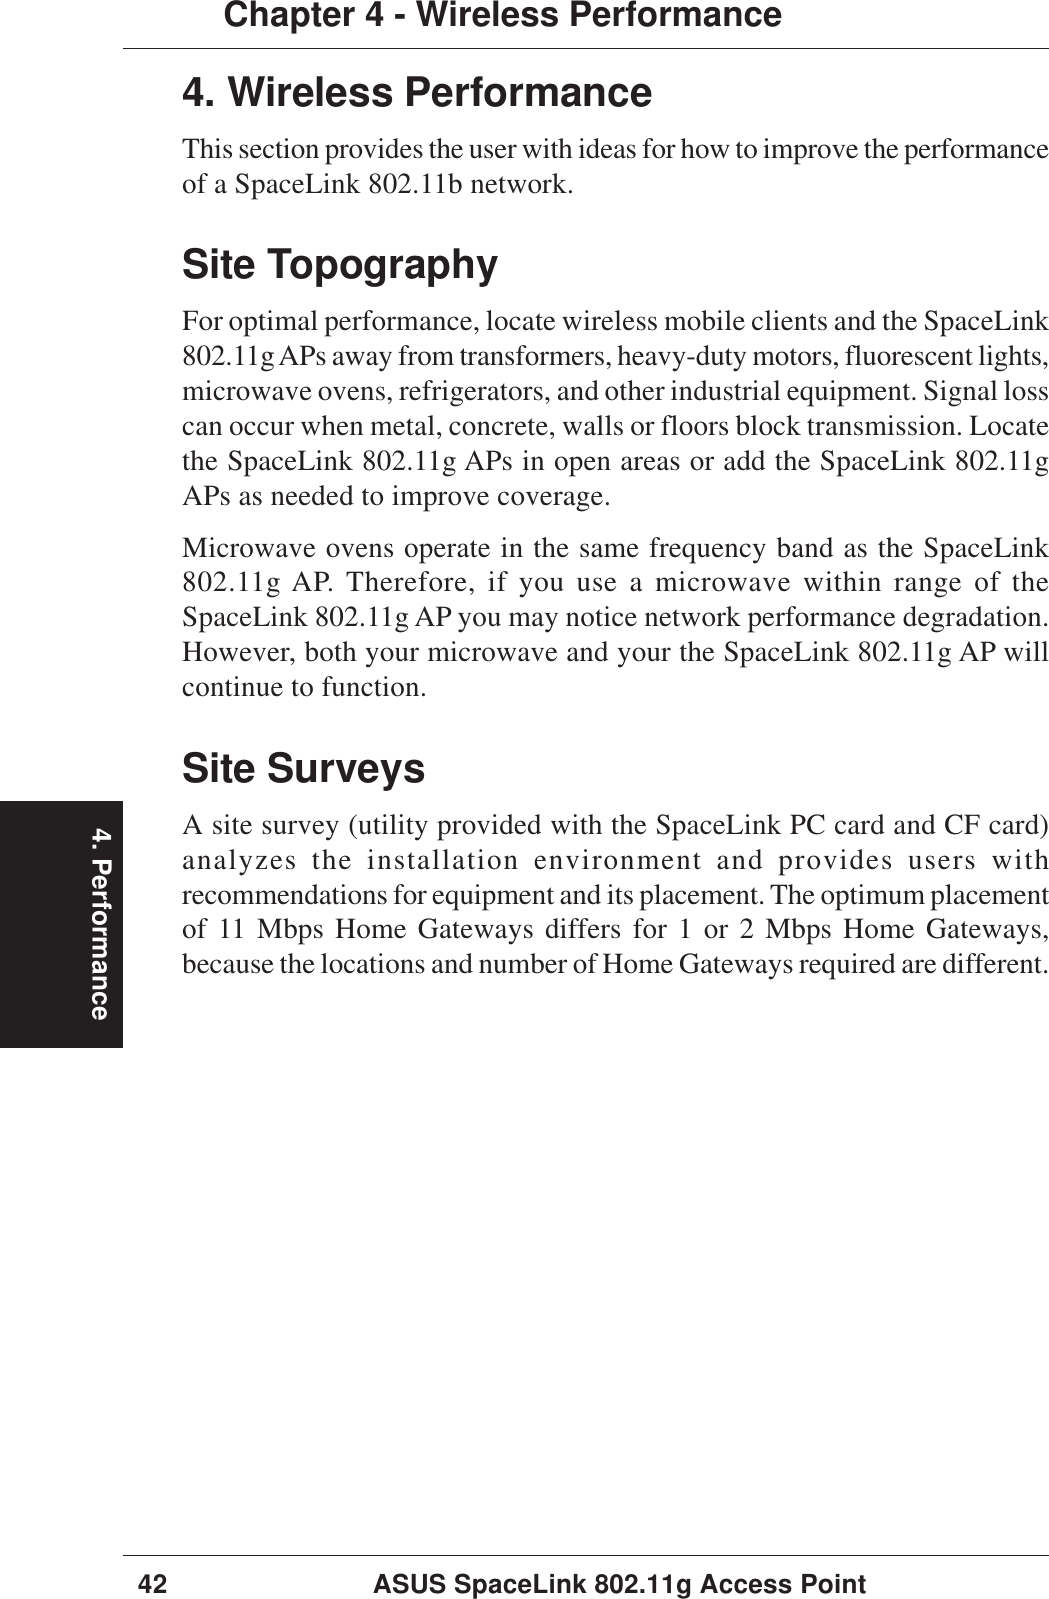 4. Performance42 ASUS SpaceLink 802.11g Access PointChapter 4 - Wireless Performance4. Wireless PerformanceThis section provides the user with ideas for how to improve the performanceof a SpaceLink 802.11b network.Site TopographyFor optimal performance, locate wireless mobile clients and the SpaceLink802.11g APs away from transformers, heavy-duty motors, fluorescent lights,microwave ovens, refrigerators, and other industrial equipment. Signal losscan occur when metal, concrete, walls or floors block transmission. Locatethe SpaceLink 802.11g APs in open areas or add the SpaceLink 802.11gAPs as needed to improve coverage.Microwave ovens operate in the same frequency band as the SpaceLink802.11g AP. Therefore, if you use a microwave within range of theSpaceLink 802.11g AP you may notice network performance degradation.However, both your microwave and your the SpaceLink 802.11g AP willcontinue to function.Site SurveysA site survey (utility provided with the SpaceLink PC card and CF card)analyzes the installation environment and provides users withrecommendations for equipment and its placement. The optimum placementof 11 Mbps Home Gateways differs for 1 or 2 Mbps Home Gateways,because the locations and number of Home Gateways required are different.